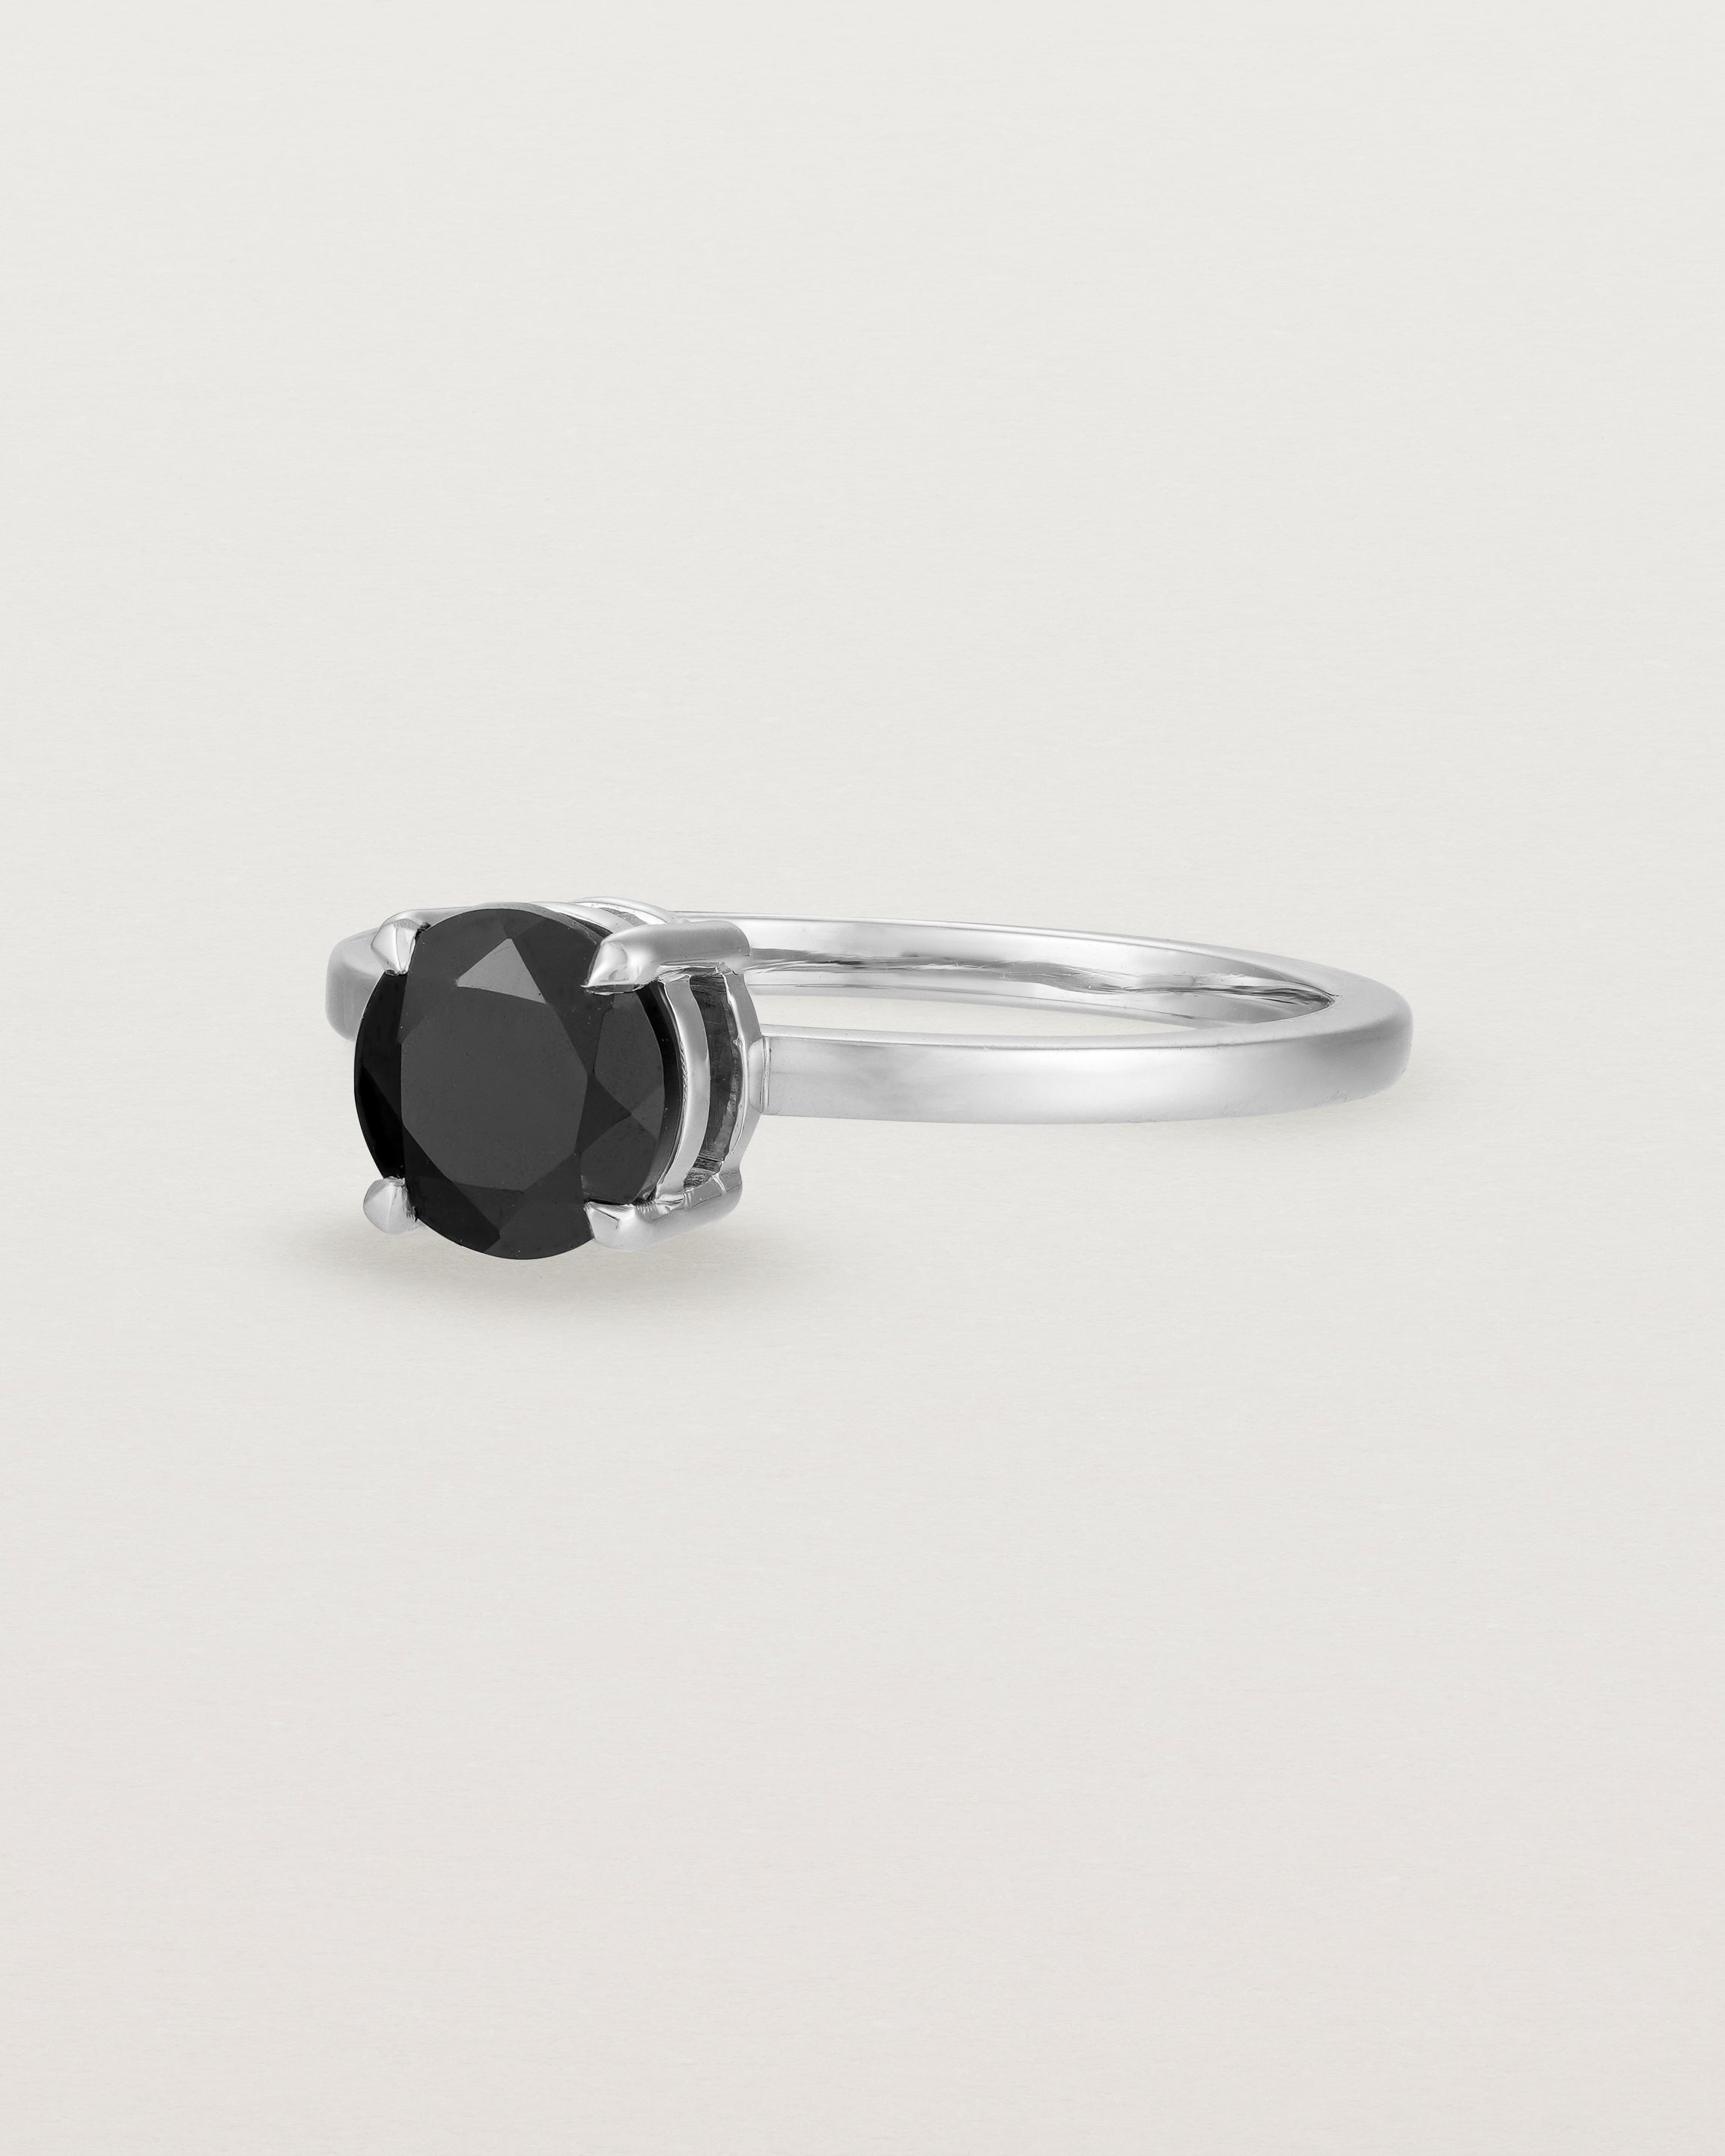 Angled view of the Petite Una Round Solitaire | Black Spinel | White Gold.